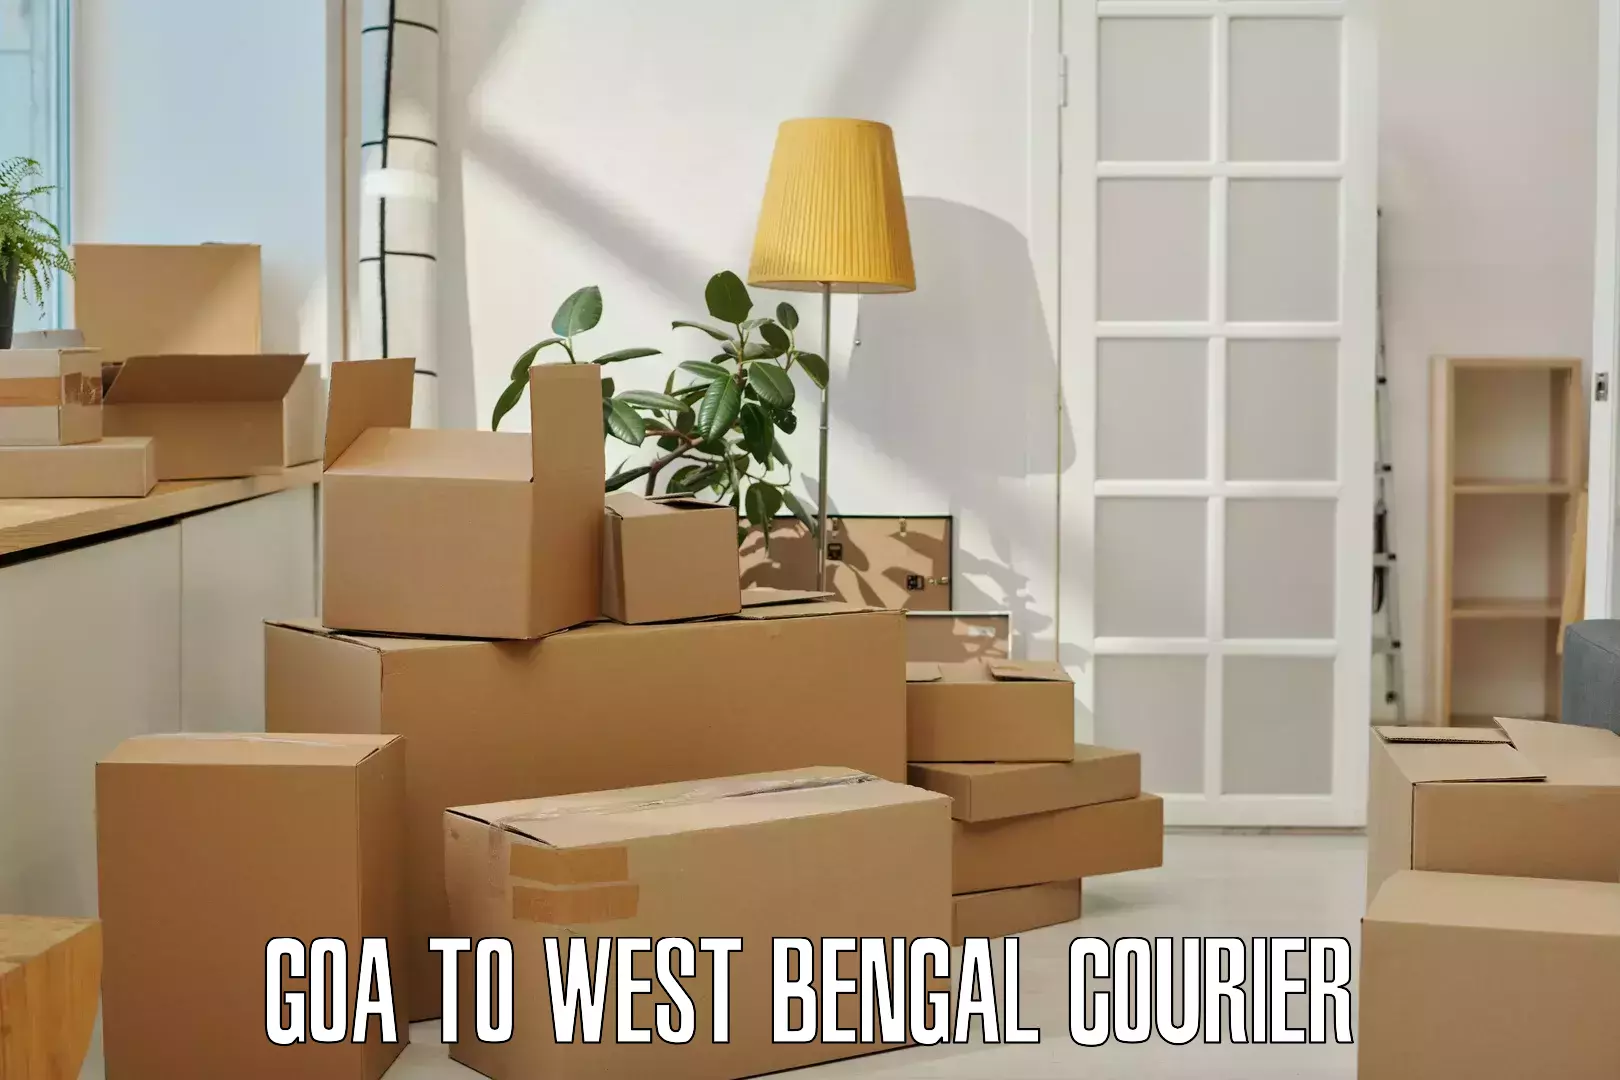 24-hour delivery options Goa to West Bengal